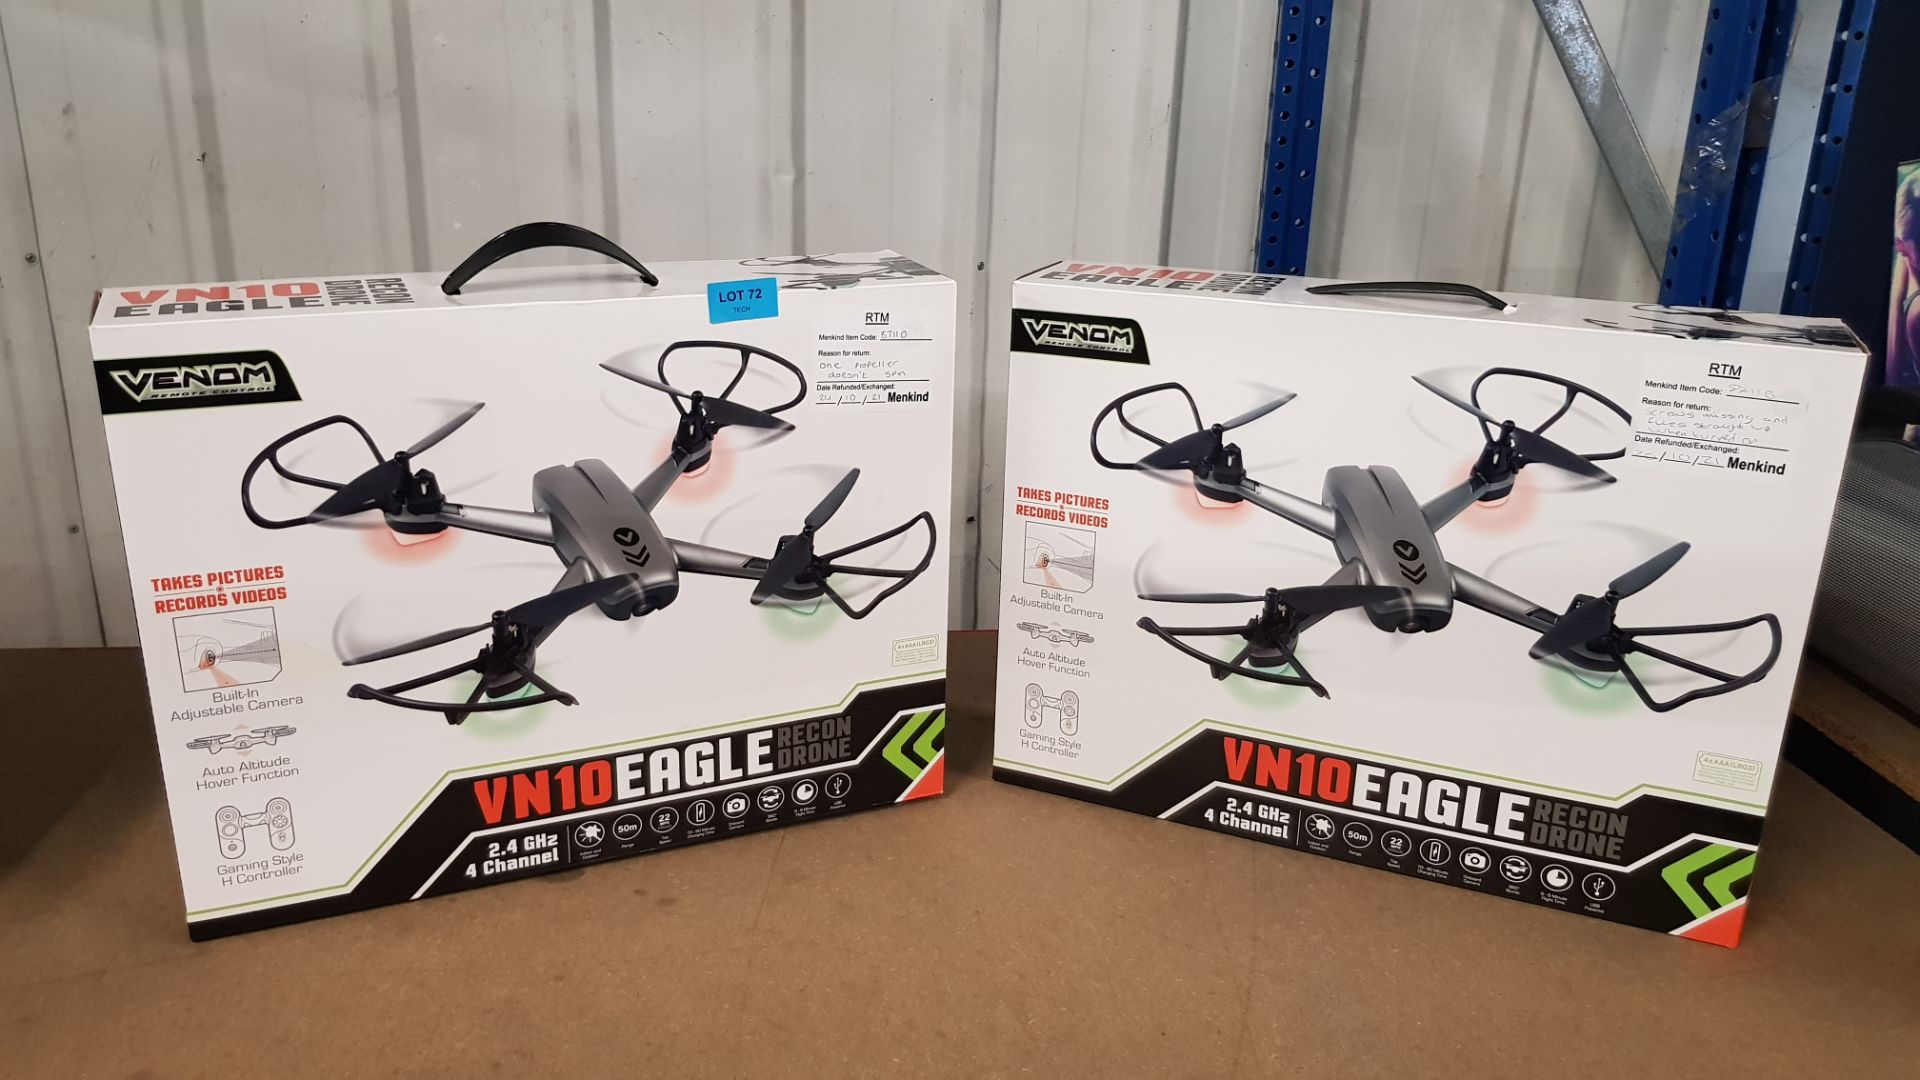 (11C) Lot RRP £90. 2x Tobar Venom VN10 Eagle Recon Drone With Camera. (All Units Have Return To... - Image 13 of 16